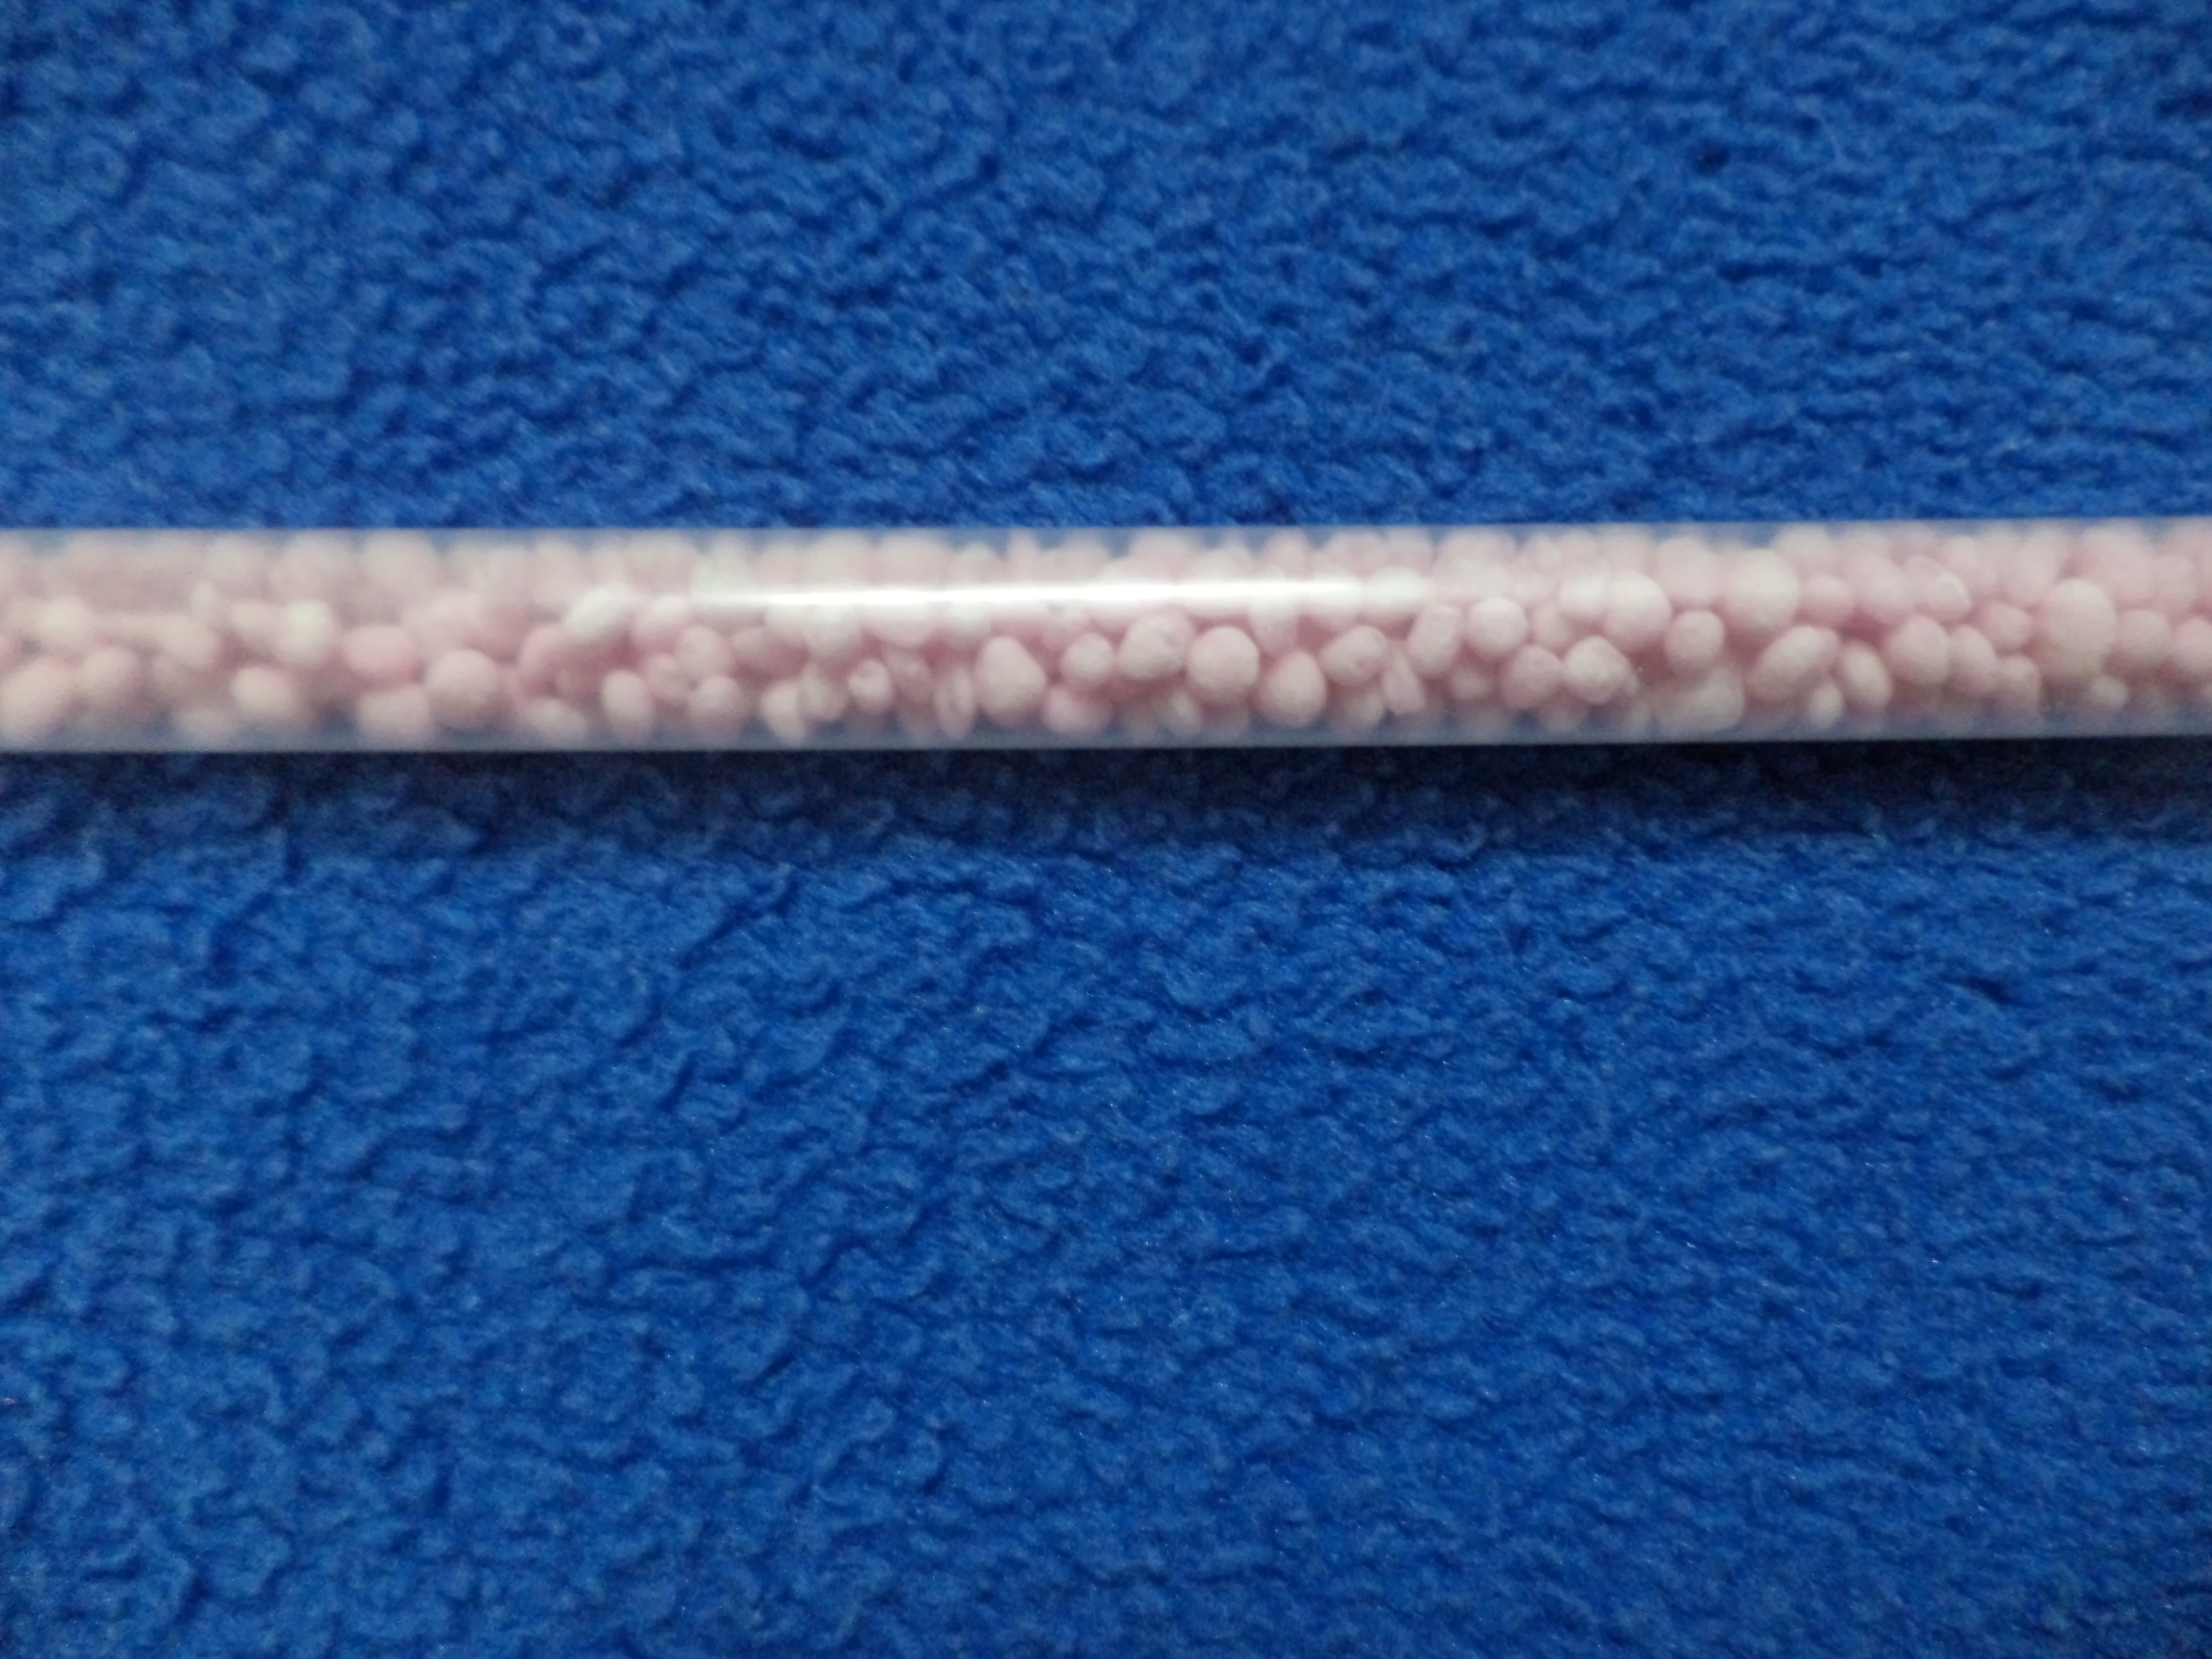 The beads inside the straws